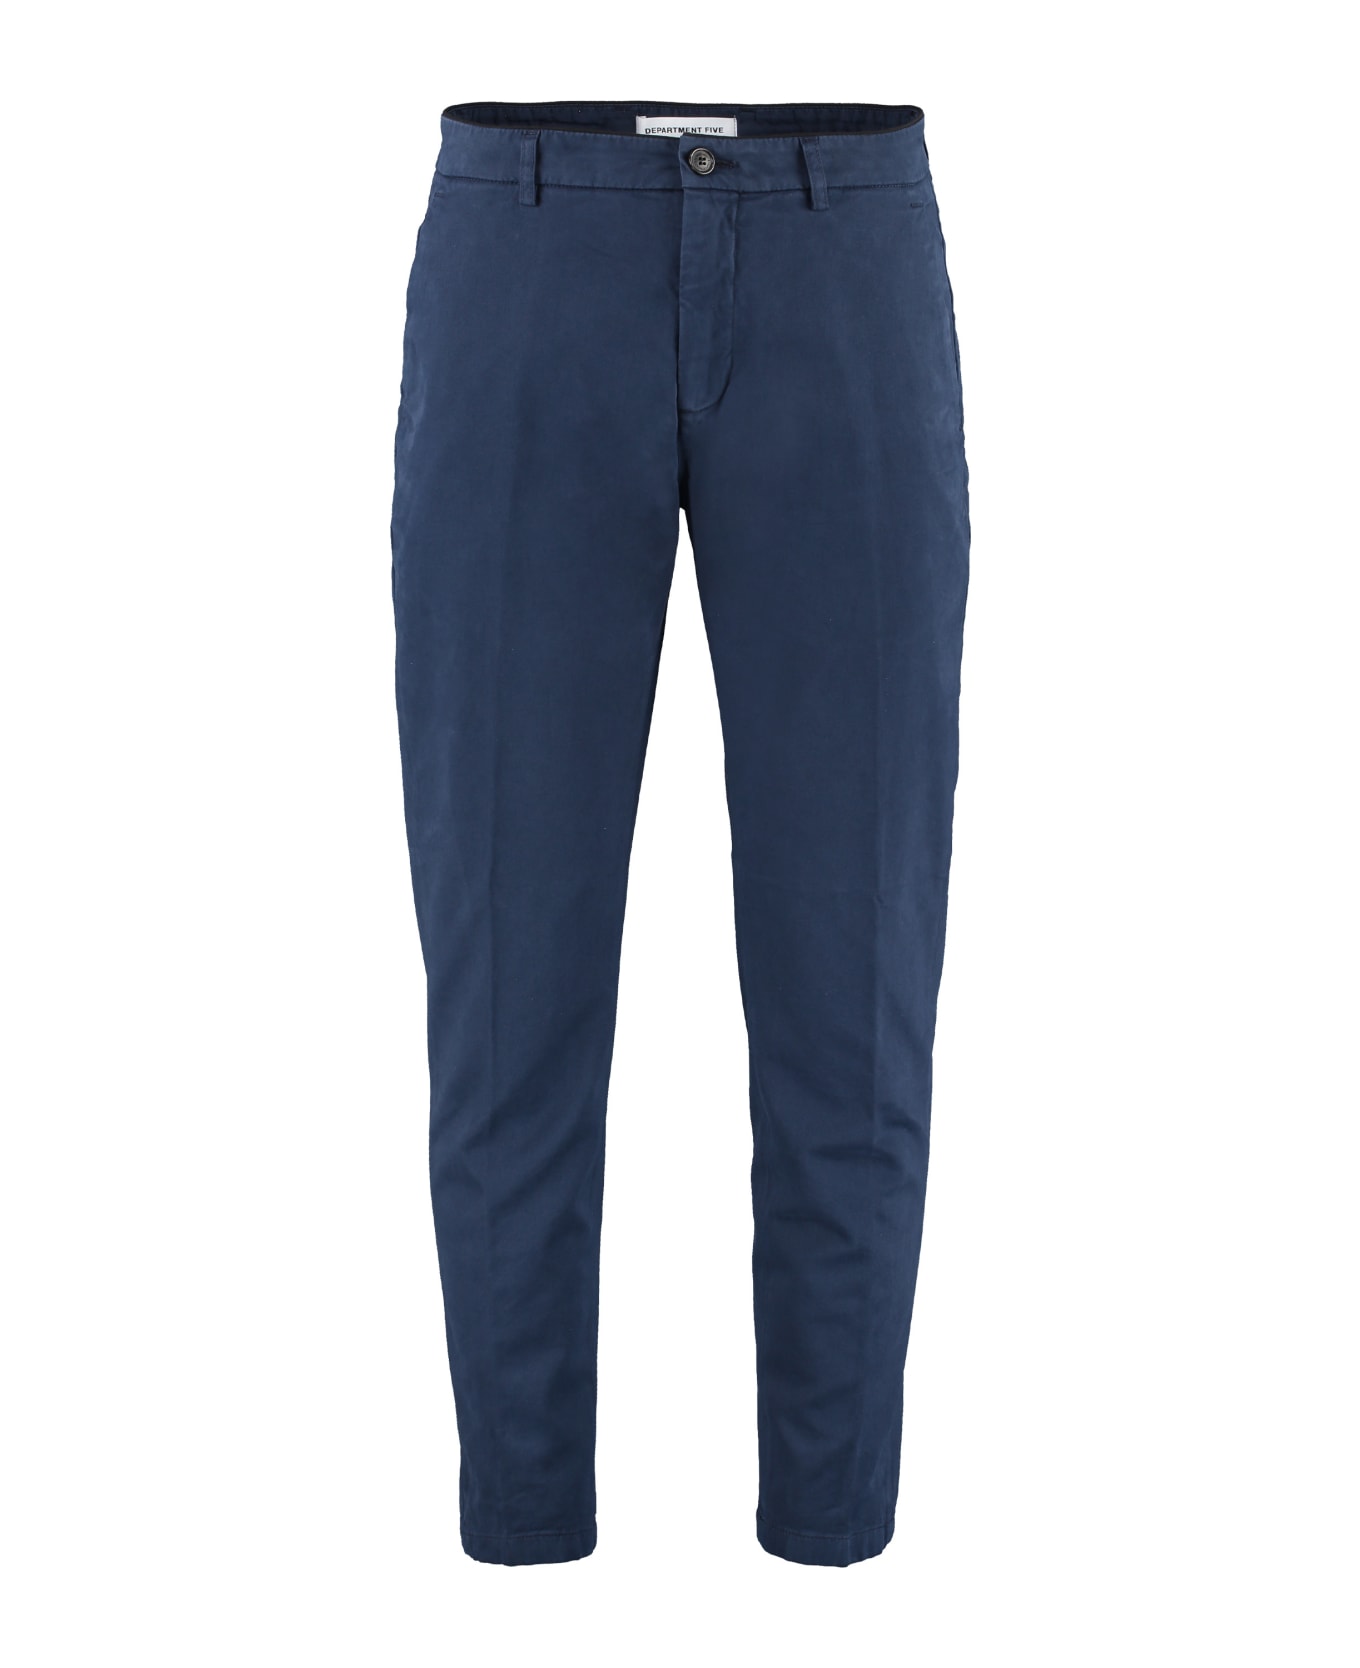 Department Five Prince Cotton Chino Trousers - blue